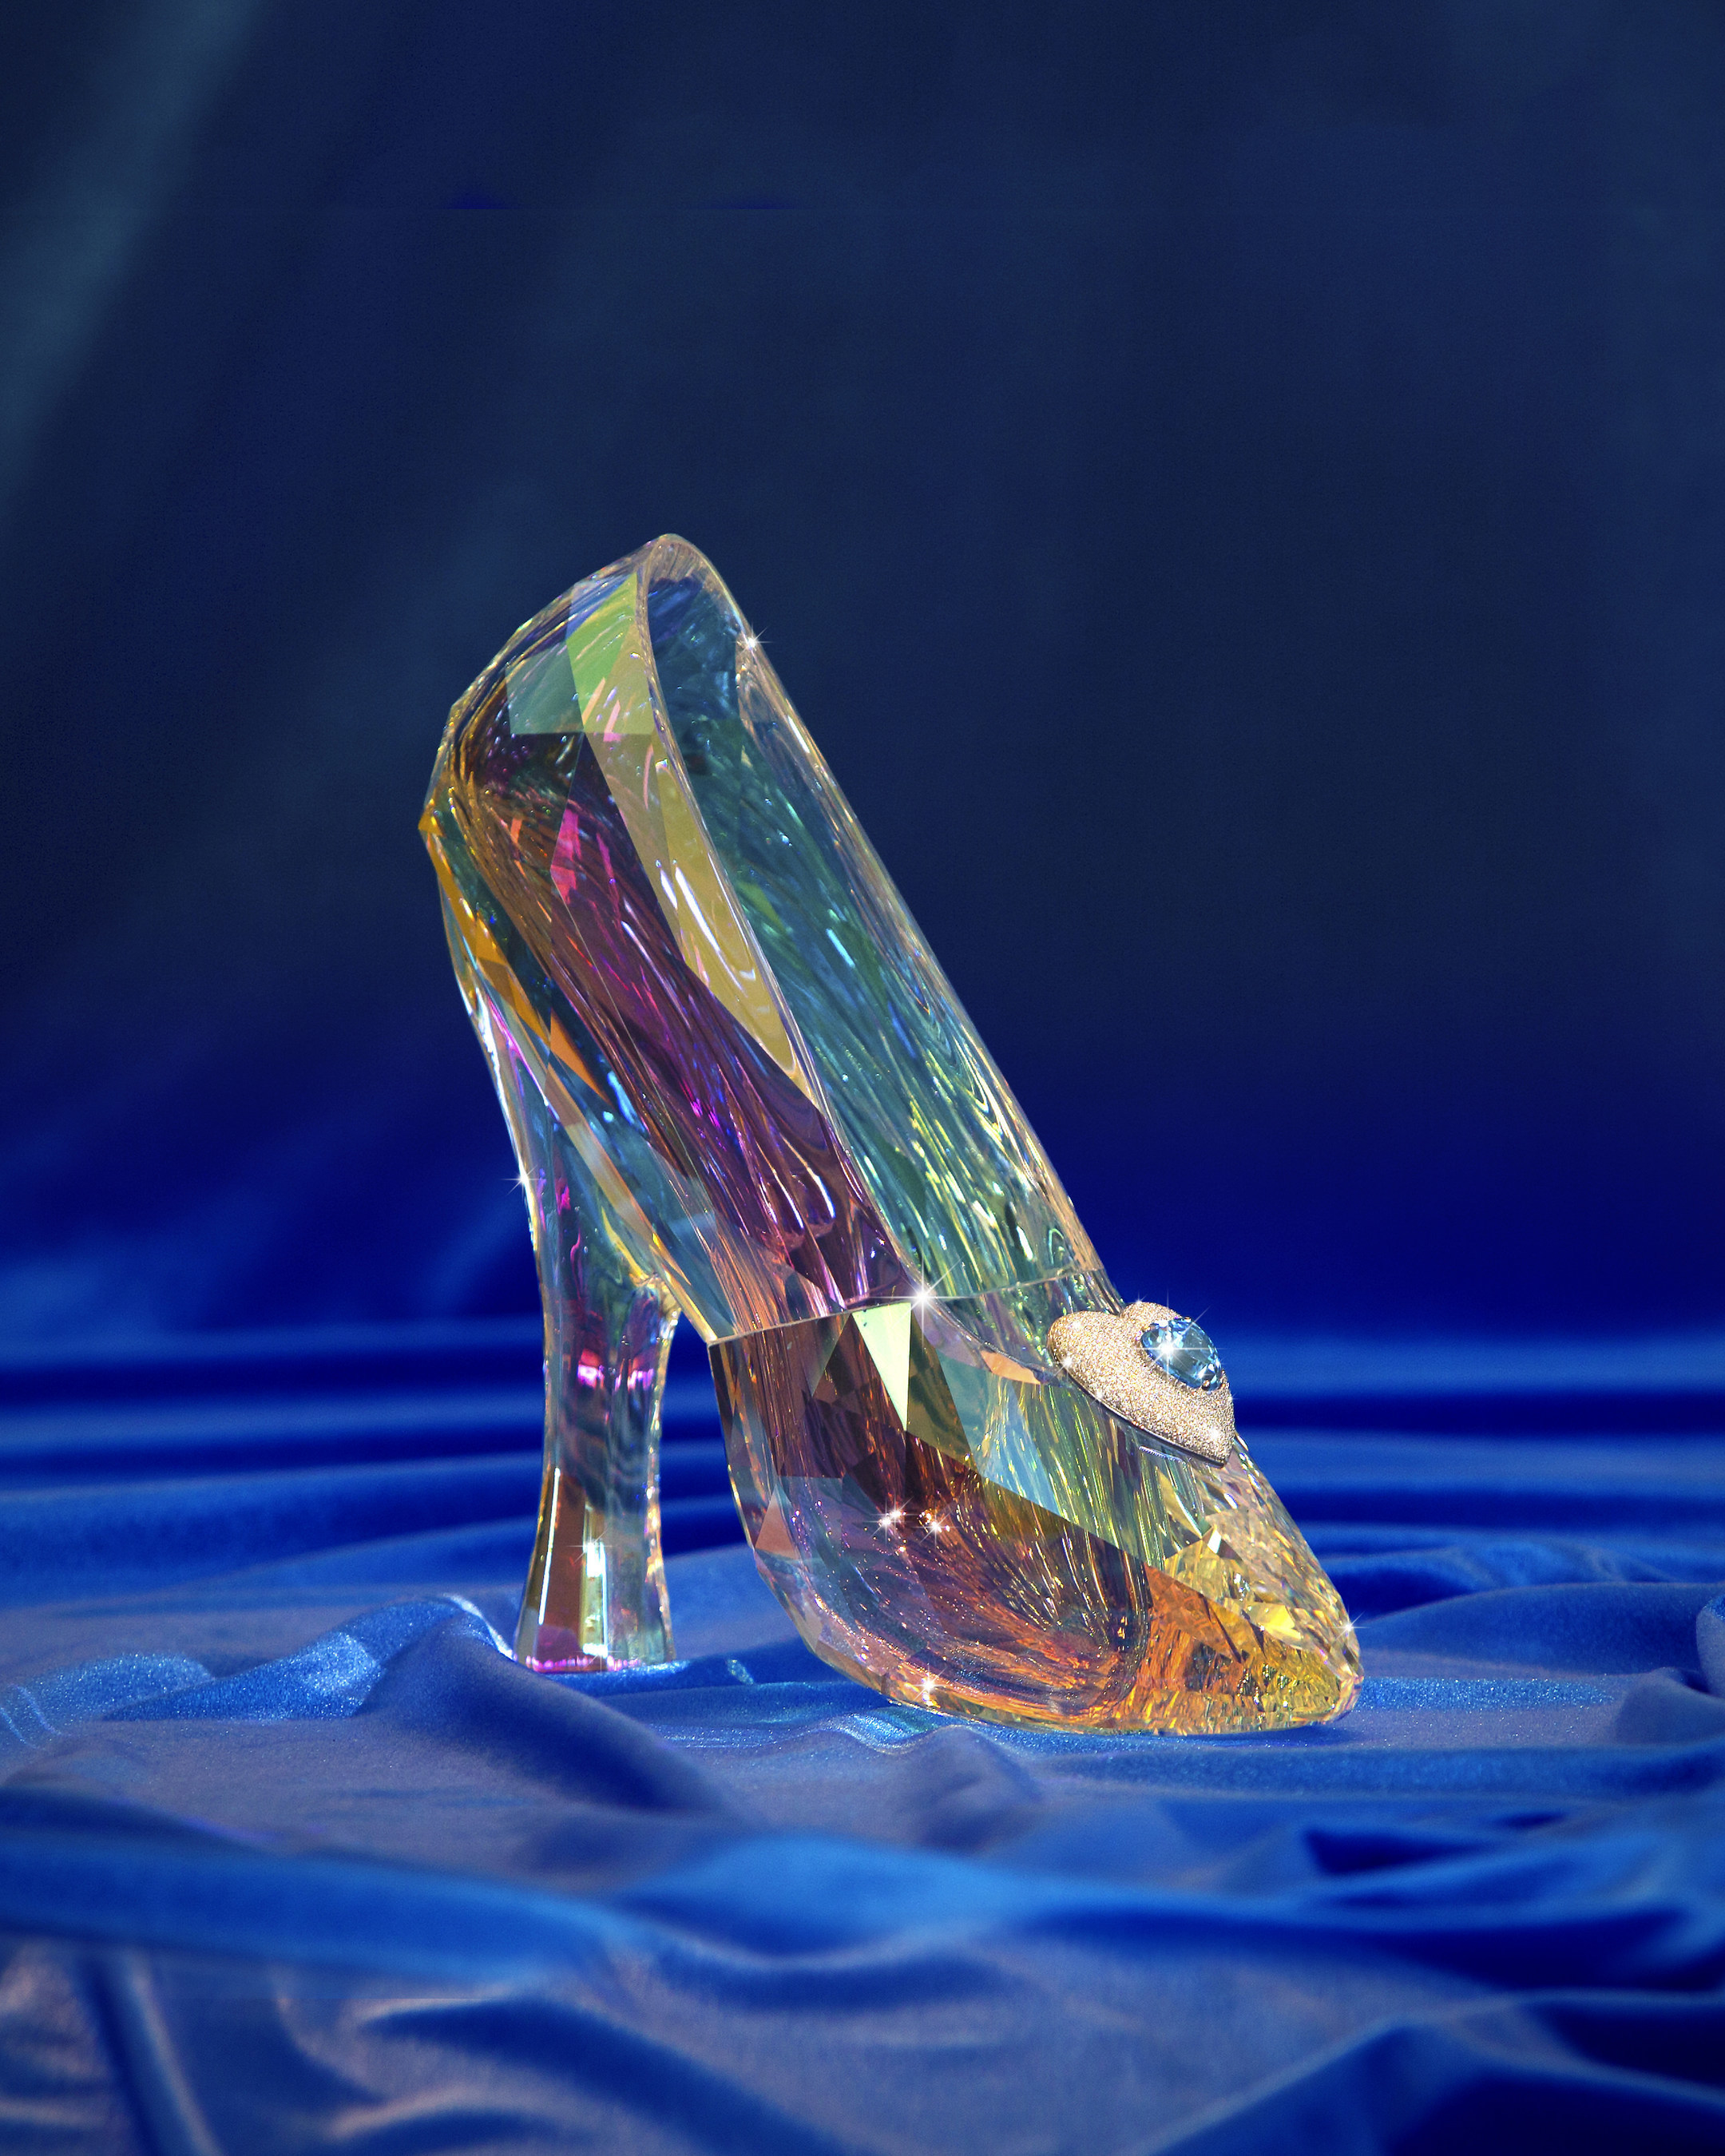 CINDERELLA SLIPPER, A PERFECT FIT FOR DISNEYLAND DIAMOND DAYS (ANAHEIM, Calif.) - A Cinderella slipper, in clear crystal and adorned with a topaz-and-diamond pendant, is one of the prizes available to win in the Disneyland Diamond Days sweepstakes. Celebrating the 60th anniversary, Disneyland Diamond Days is an exciting sweepstakes in which guests can win daily and weekly prizes as part of the Diamond Celebration, which begins May 22, 2015. (Disneyland Resort)